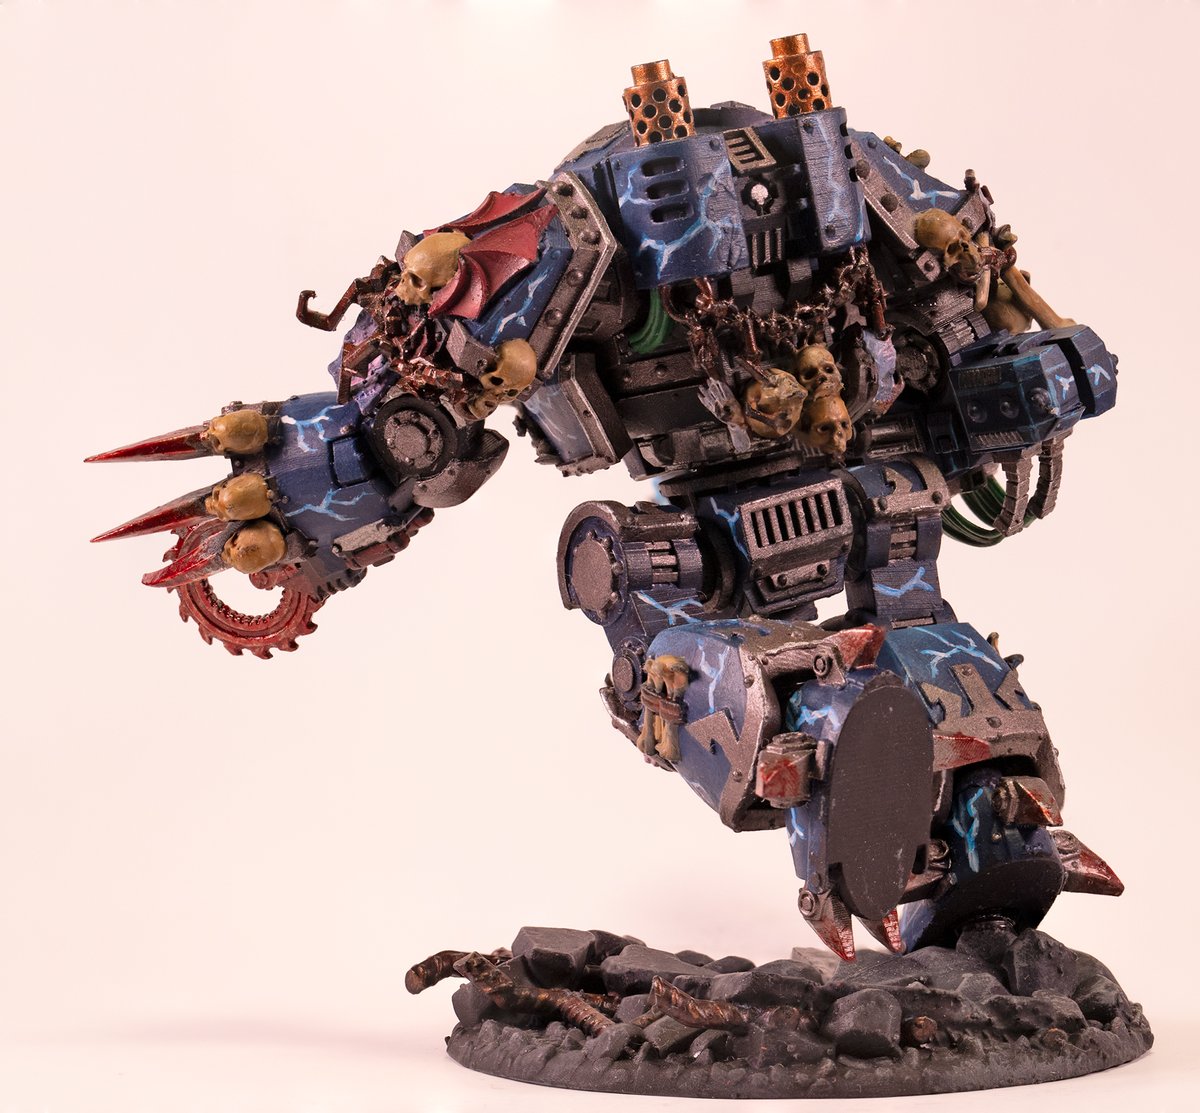 I think that's it for the Night Lords 'Ossarion' Contemptor Dreadnought.  
I'll have a beer now. Or maybe two. #PaintingWarhammer 
#WarhammerCommunity 
#nightlords 
#horusheresy
@warhammer